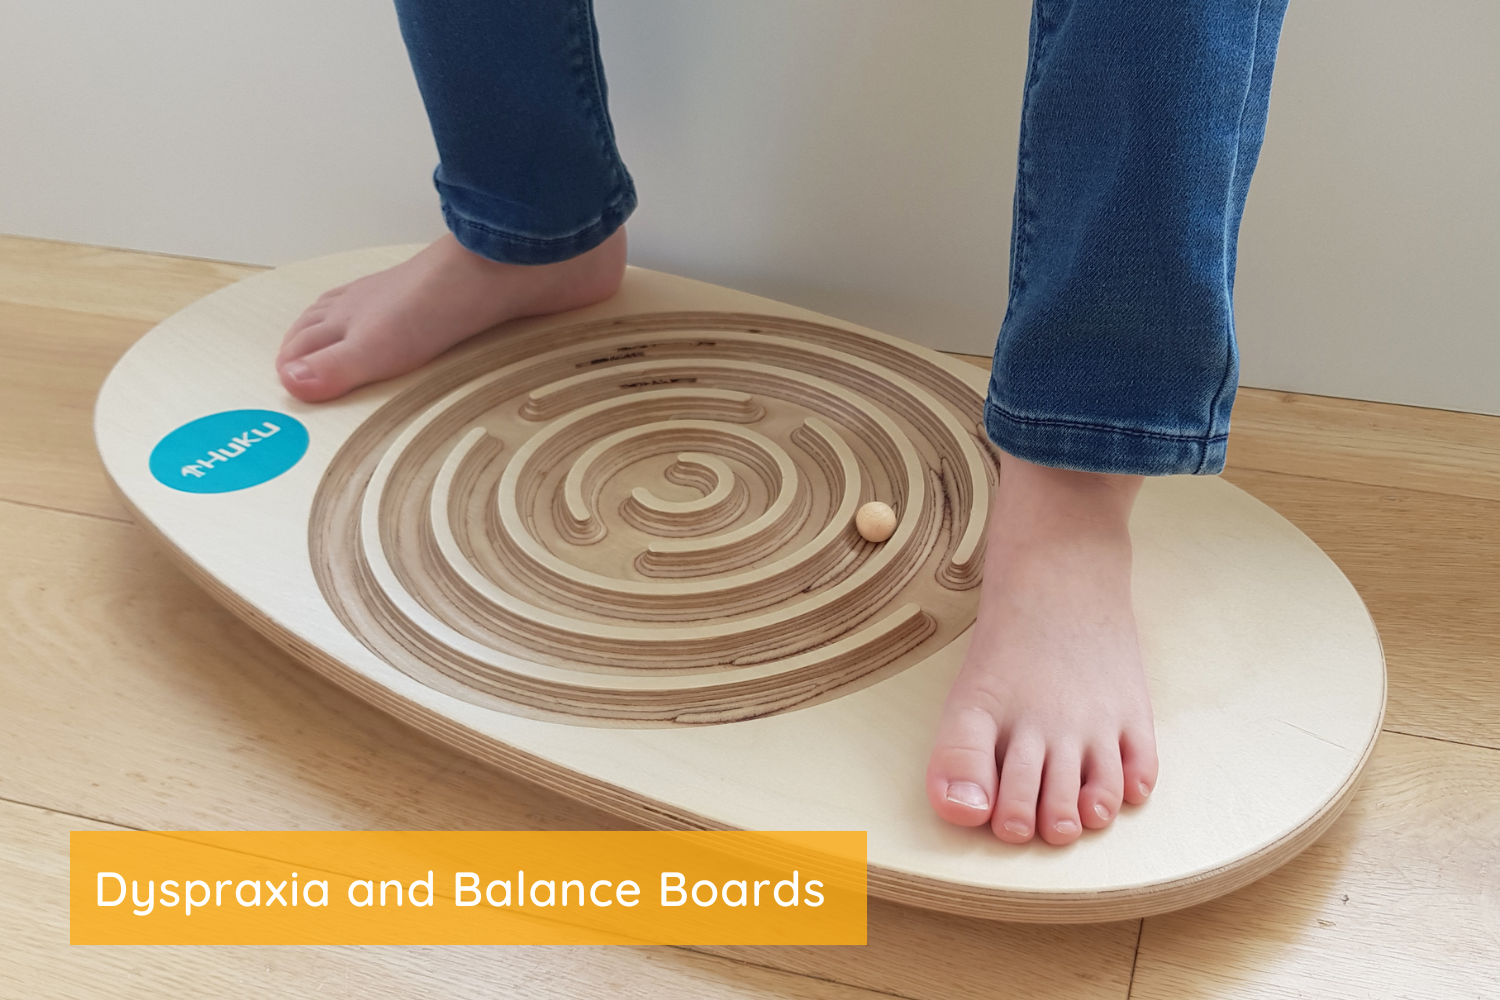 Dyspraxia and Balance Boards